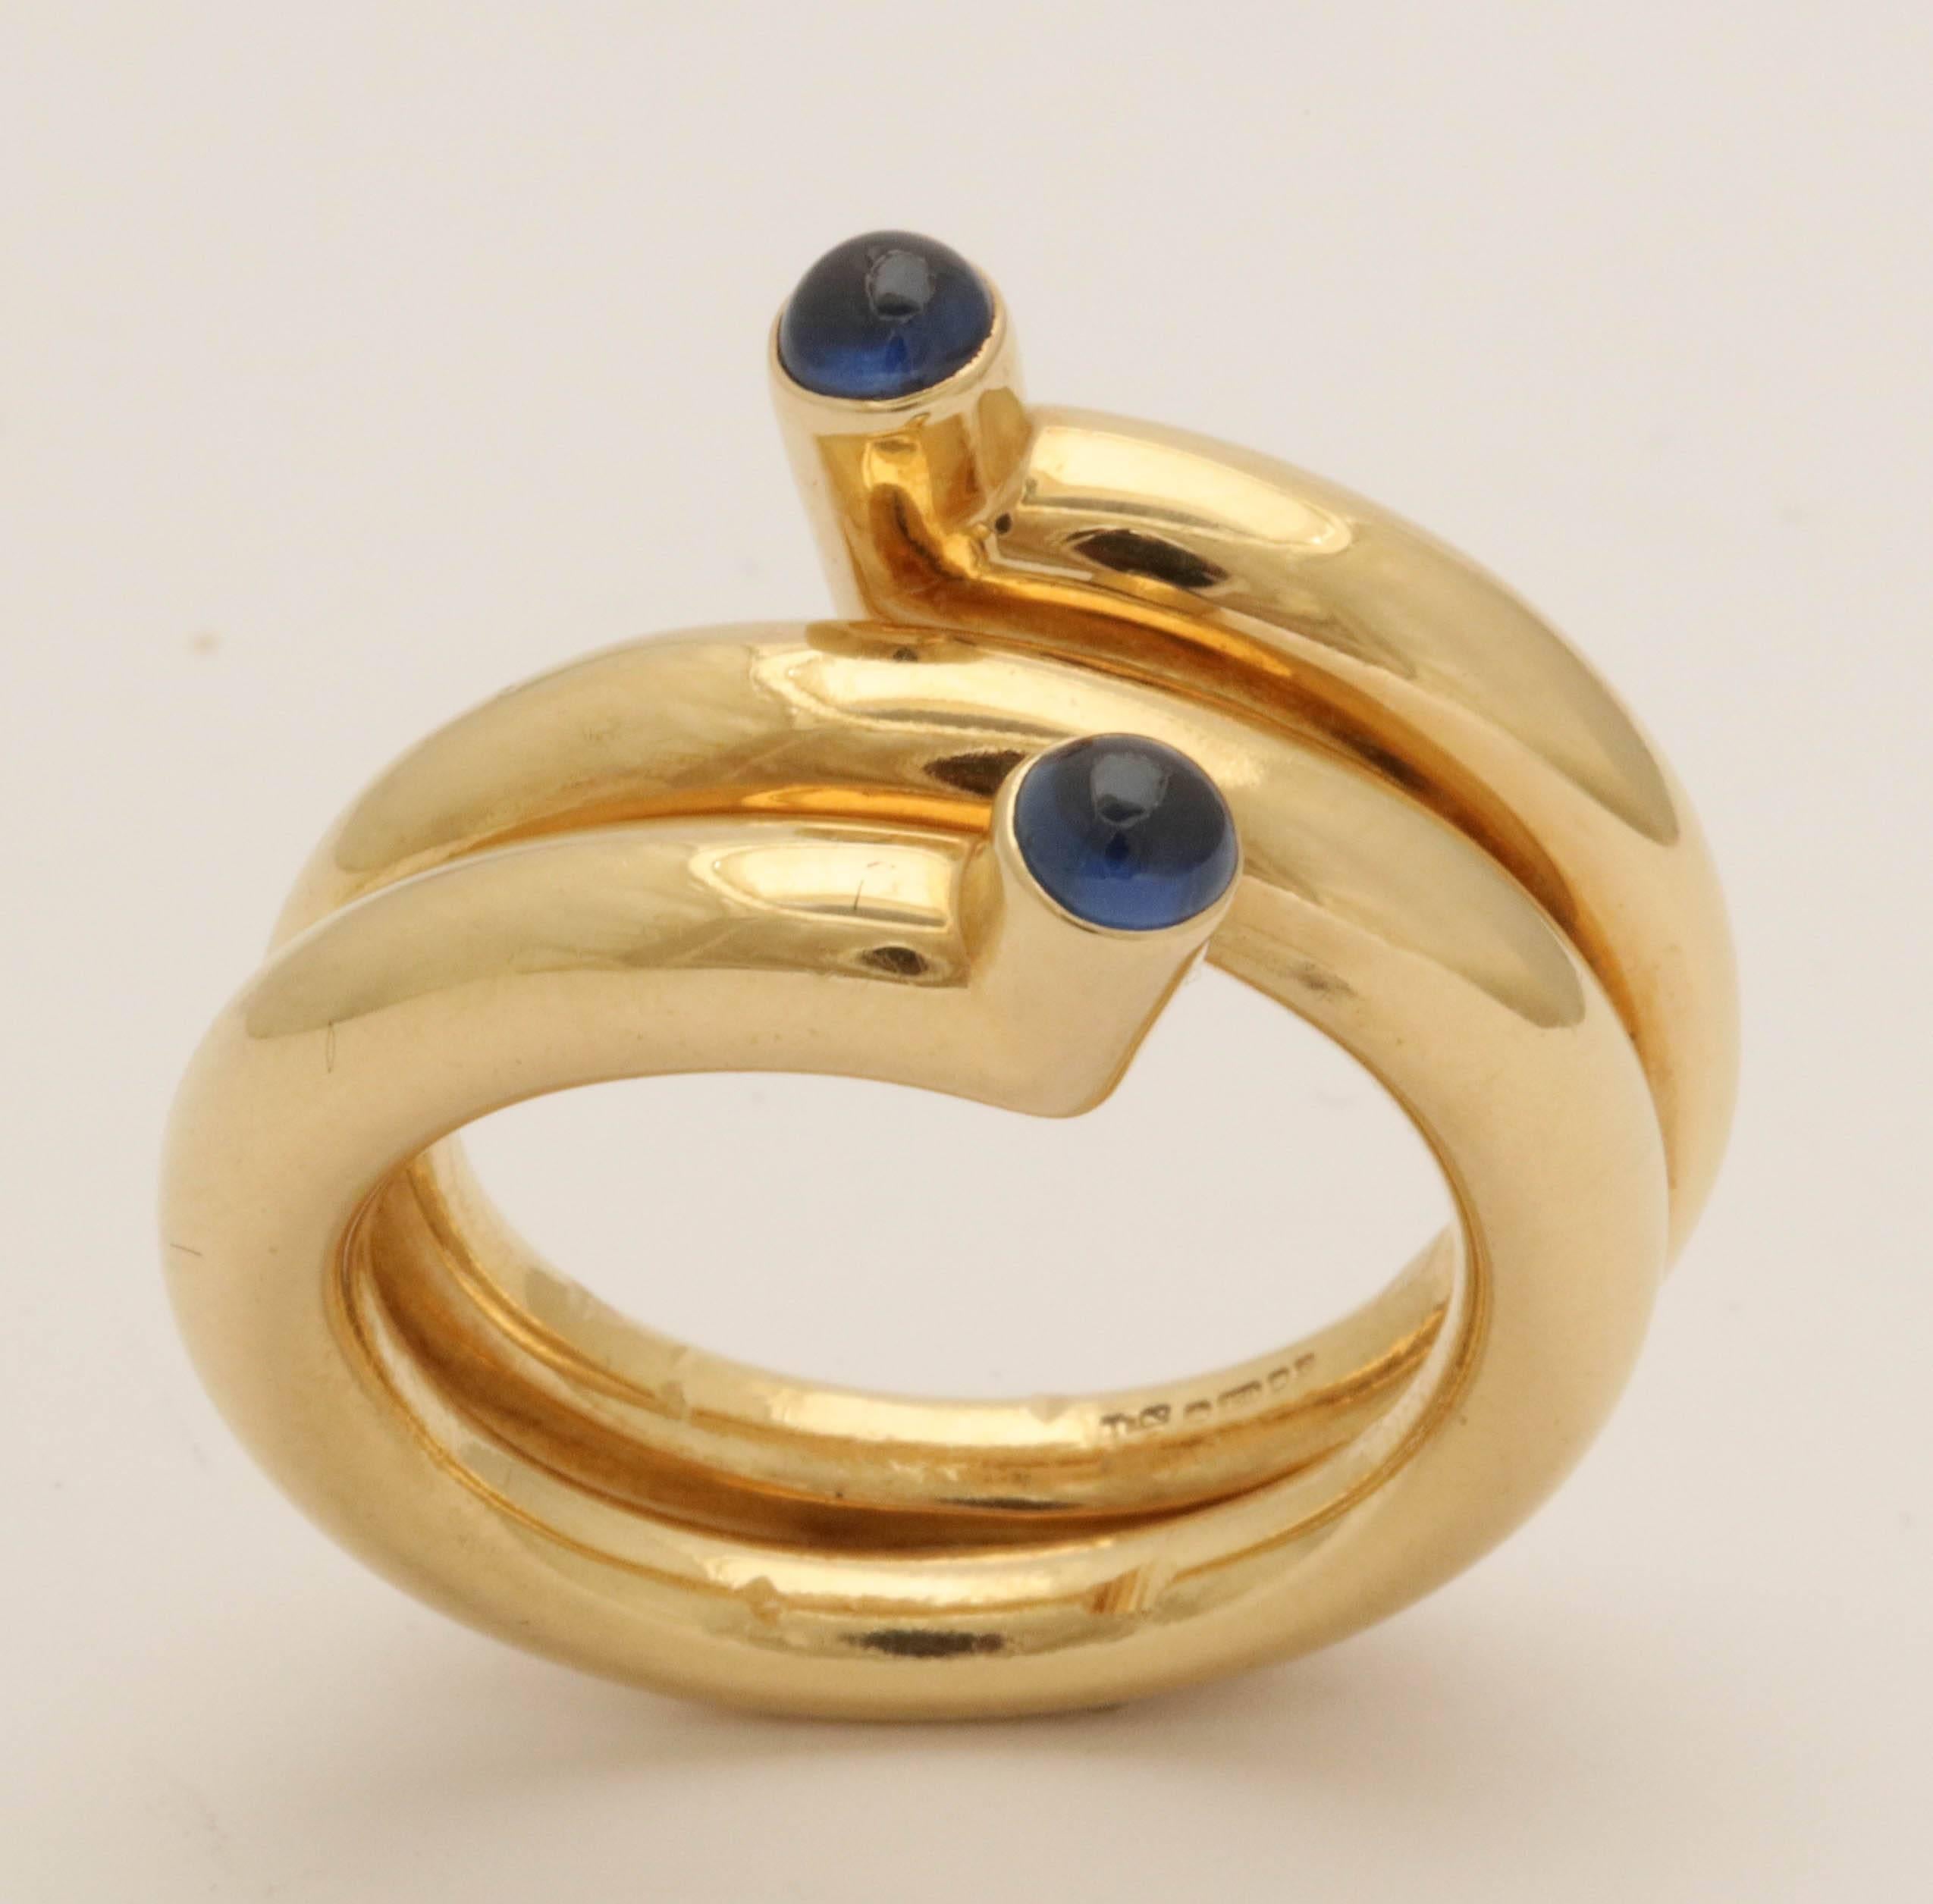 One 18kt High Polish  Heavy 18kt Yellow Gold Wrap Twist Design In The Form Of A Coil Band Ring Embellished With Two High Quality Beautiful Color Cabochon Sapphires. Ring Averaging Around A Size 8 & 1/2 American Size. Designed By Schlumberger For